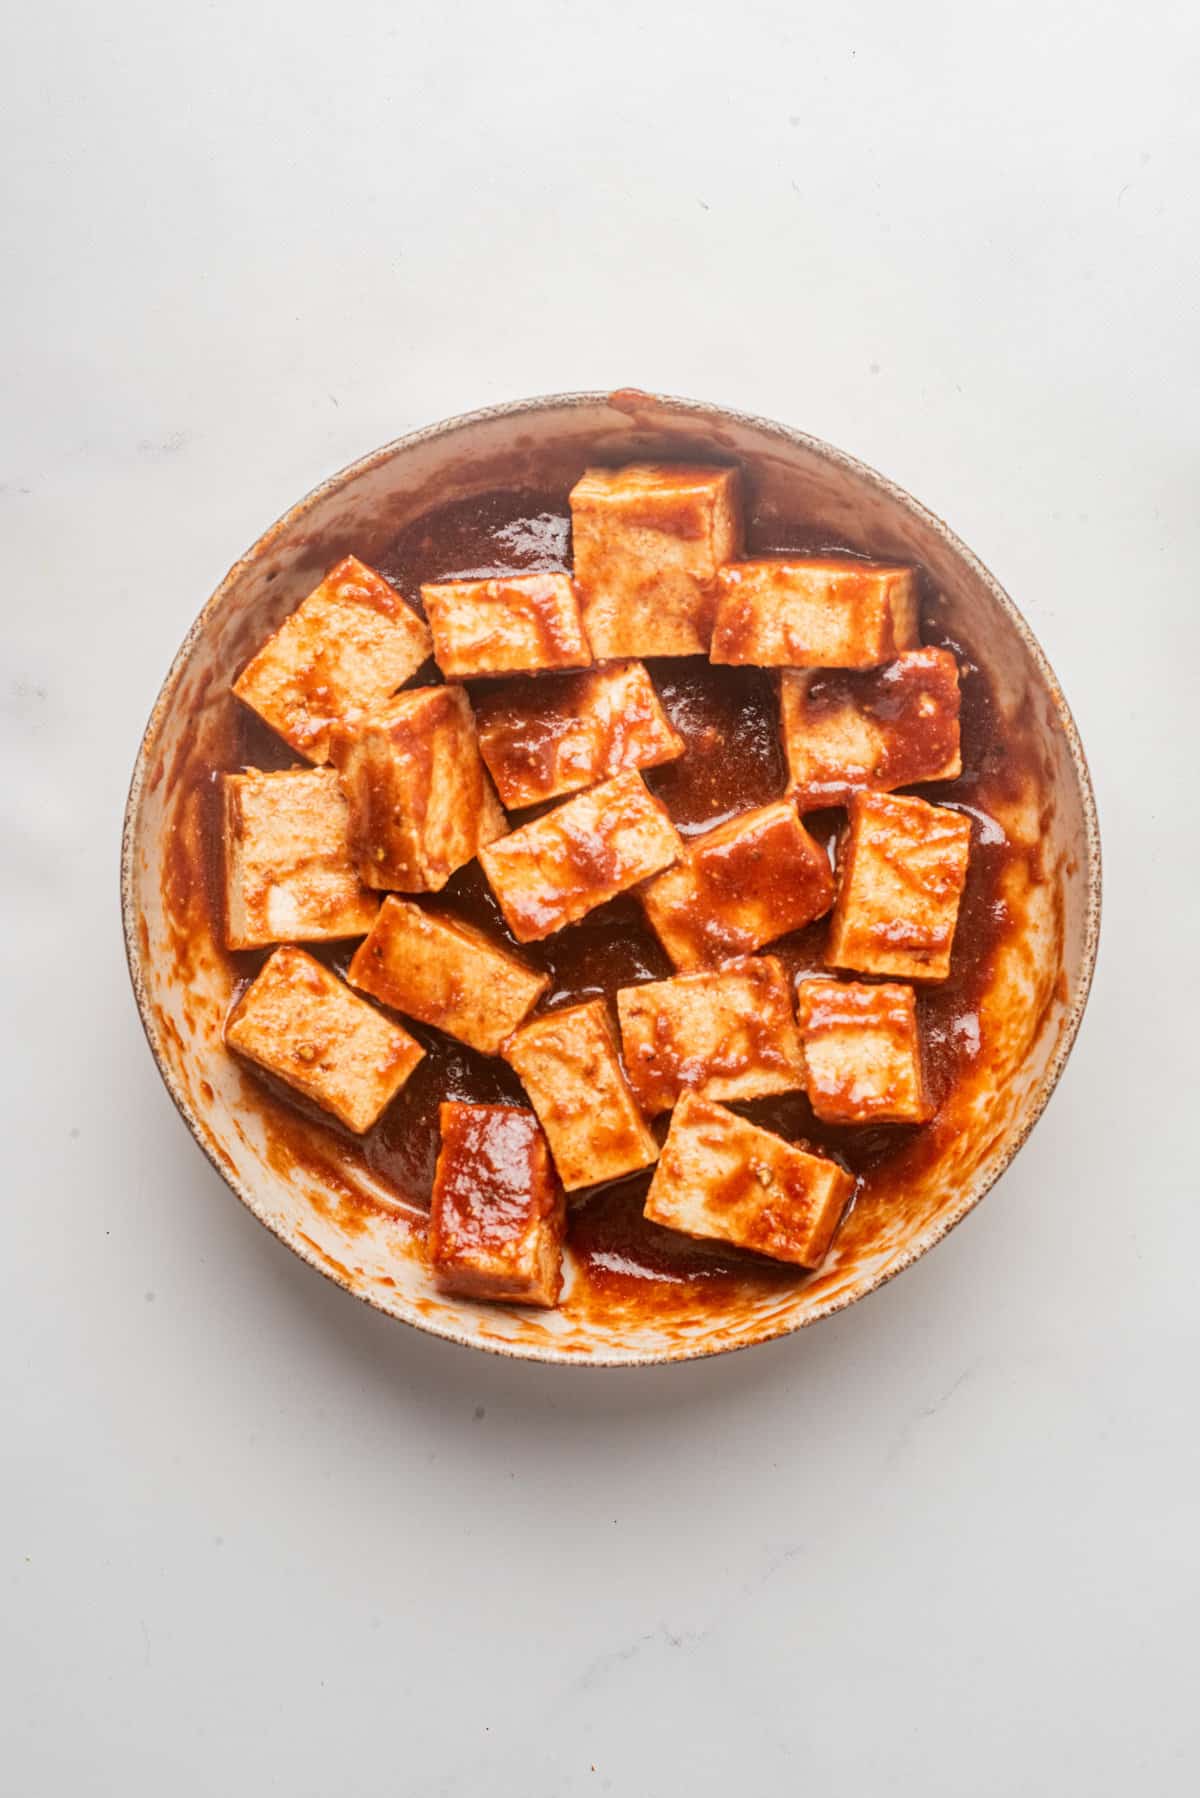 An image of tofu tossed in a gochujang sauce mixture.